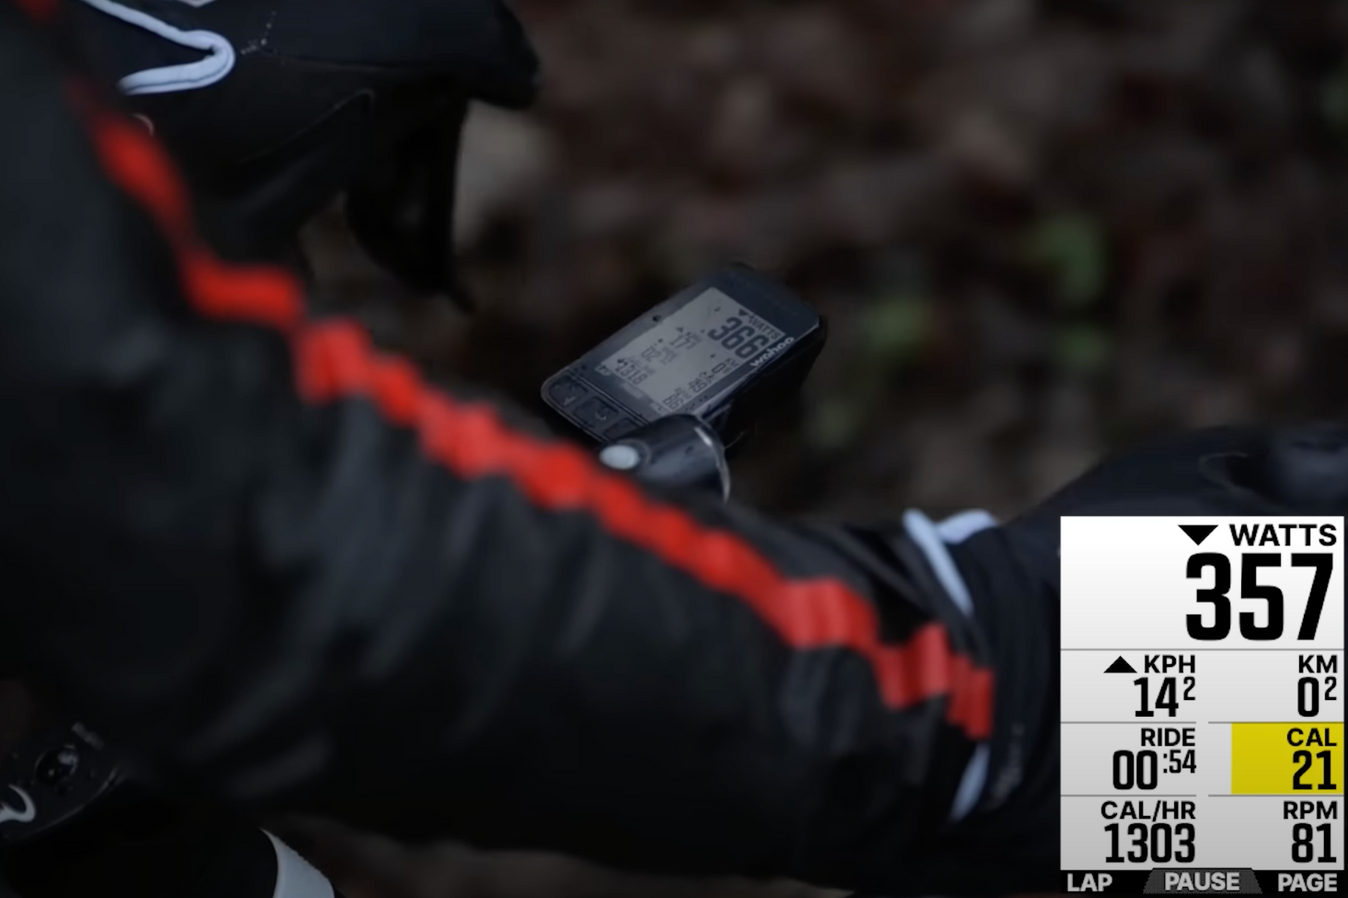 A power meter like a Wahoo ELEMNT can help measure how many calories you are burning